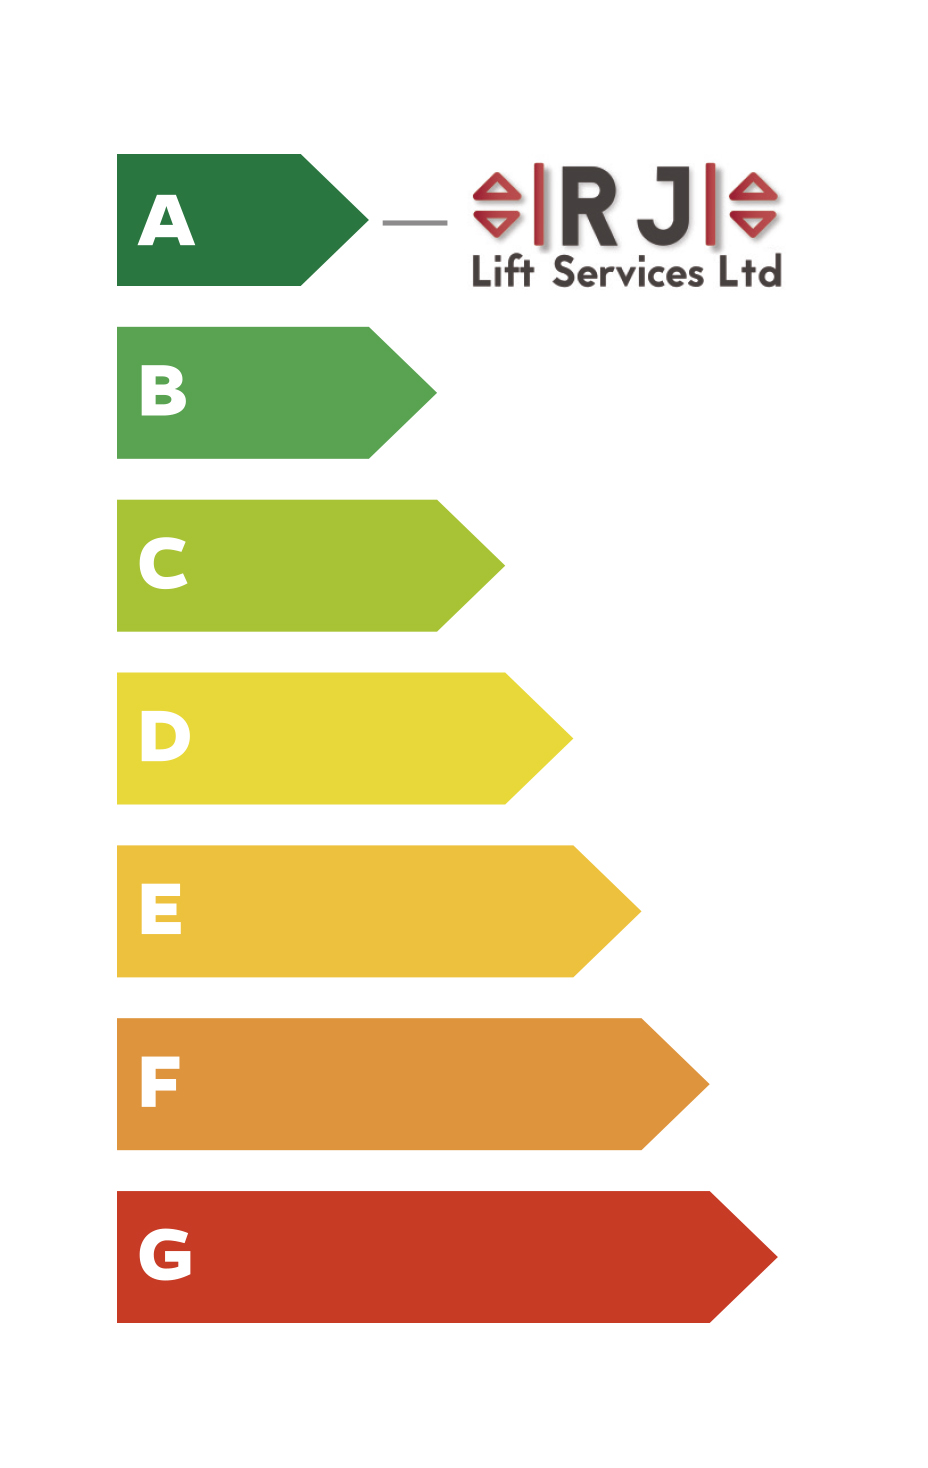 Energy rating for lifts manufactured by R J Lift Services